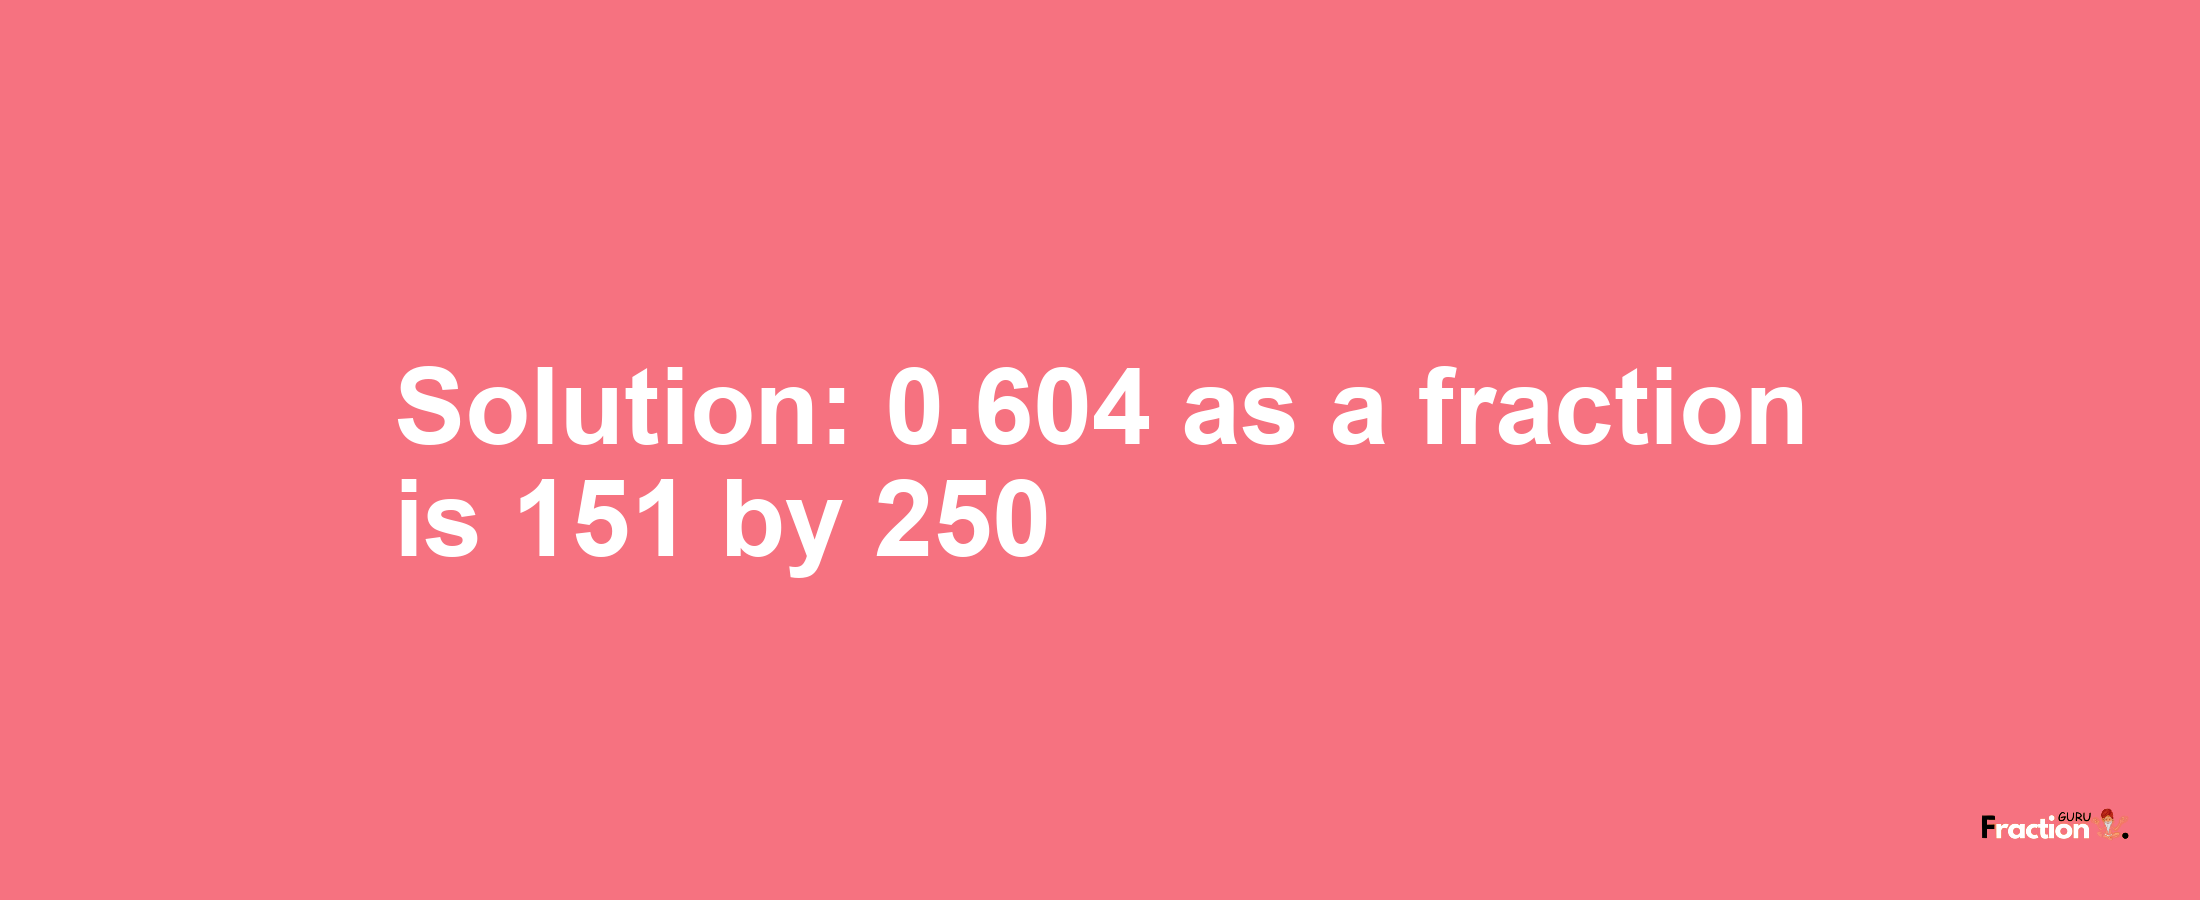 Solution:0.604 as a fraction is 151/250